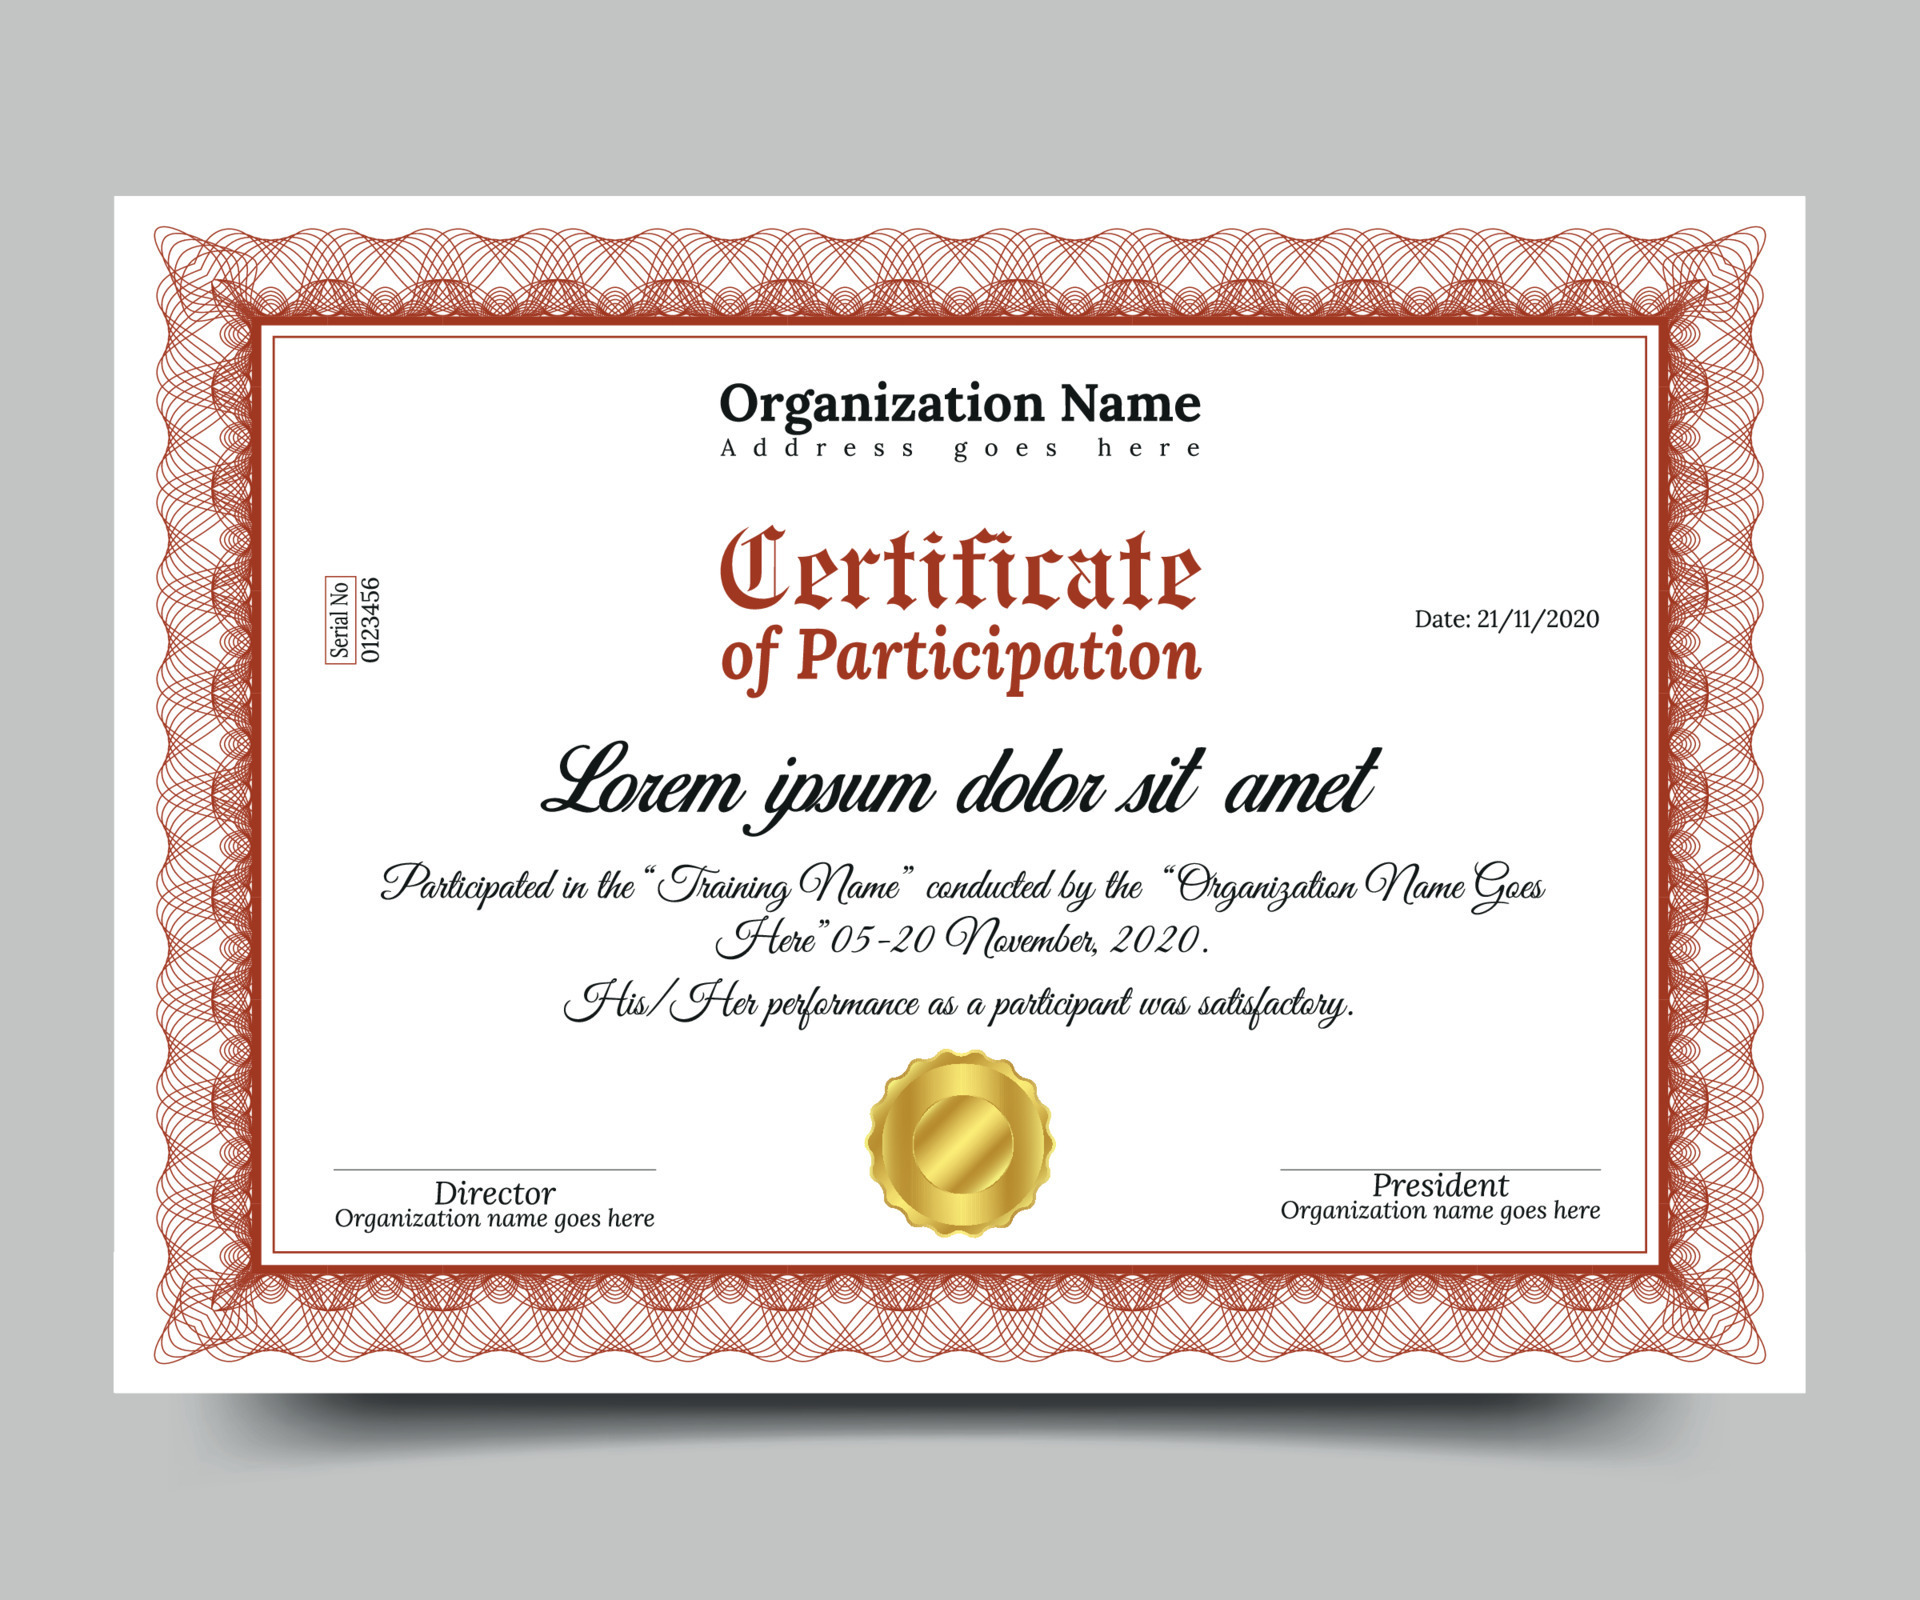 Certificate Of Participation Template Free Vector 7722018 Vector Art At